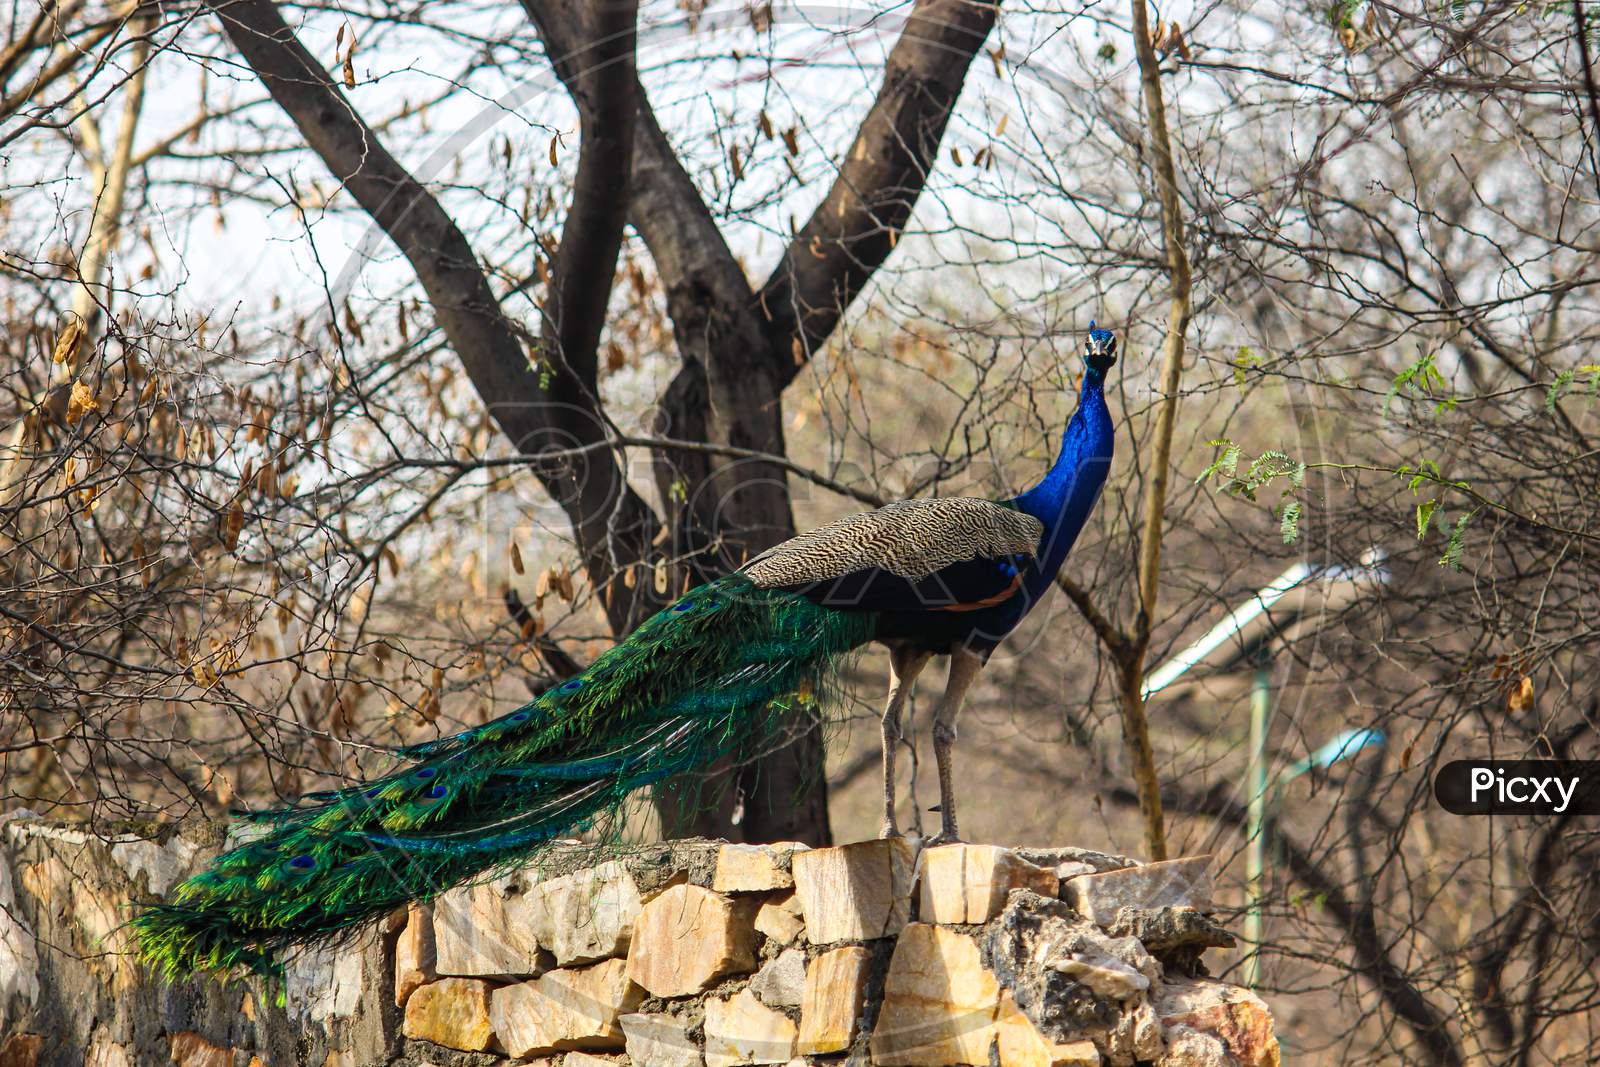 Pavo is a genus of two species in the pheasant family. The two species, along with the Congo peacock, are known as peafowl.